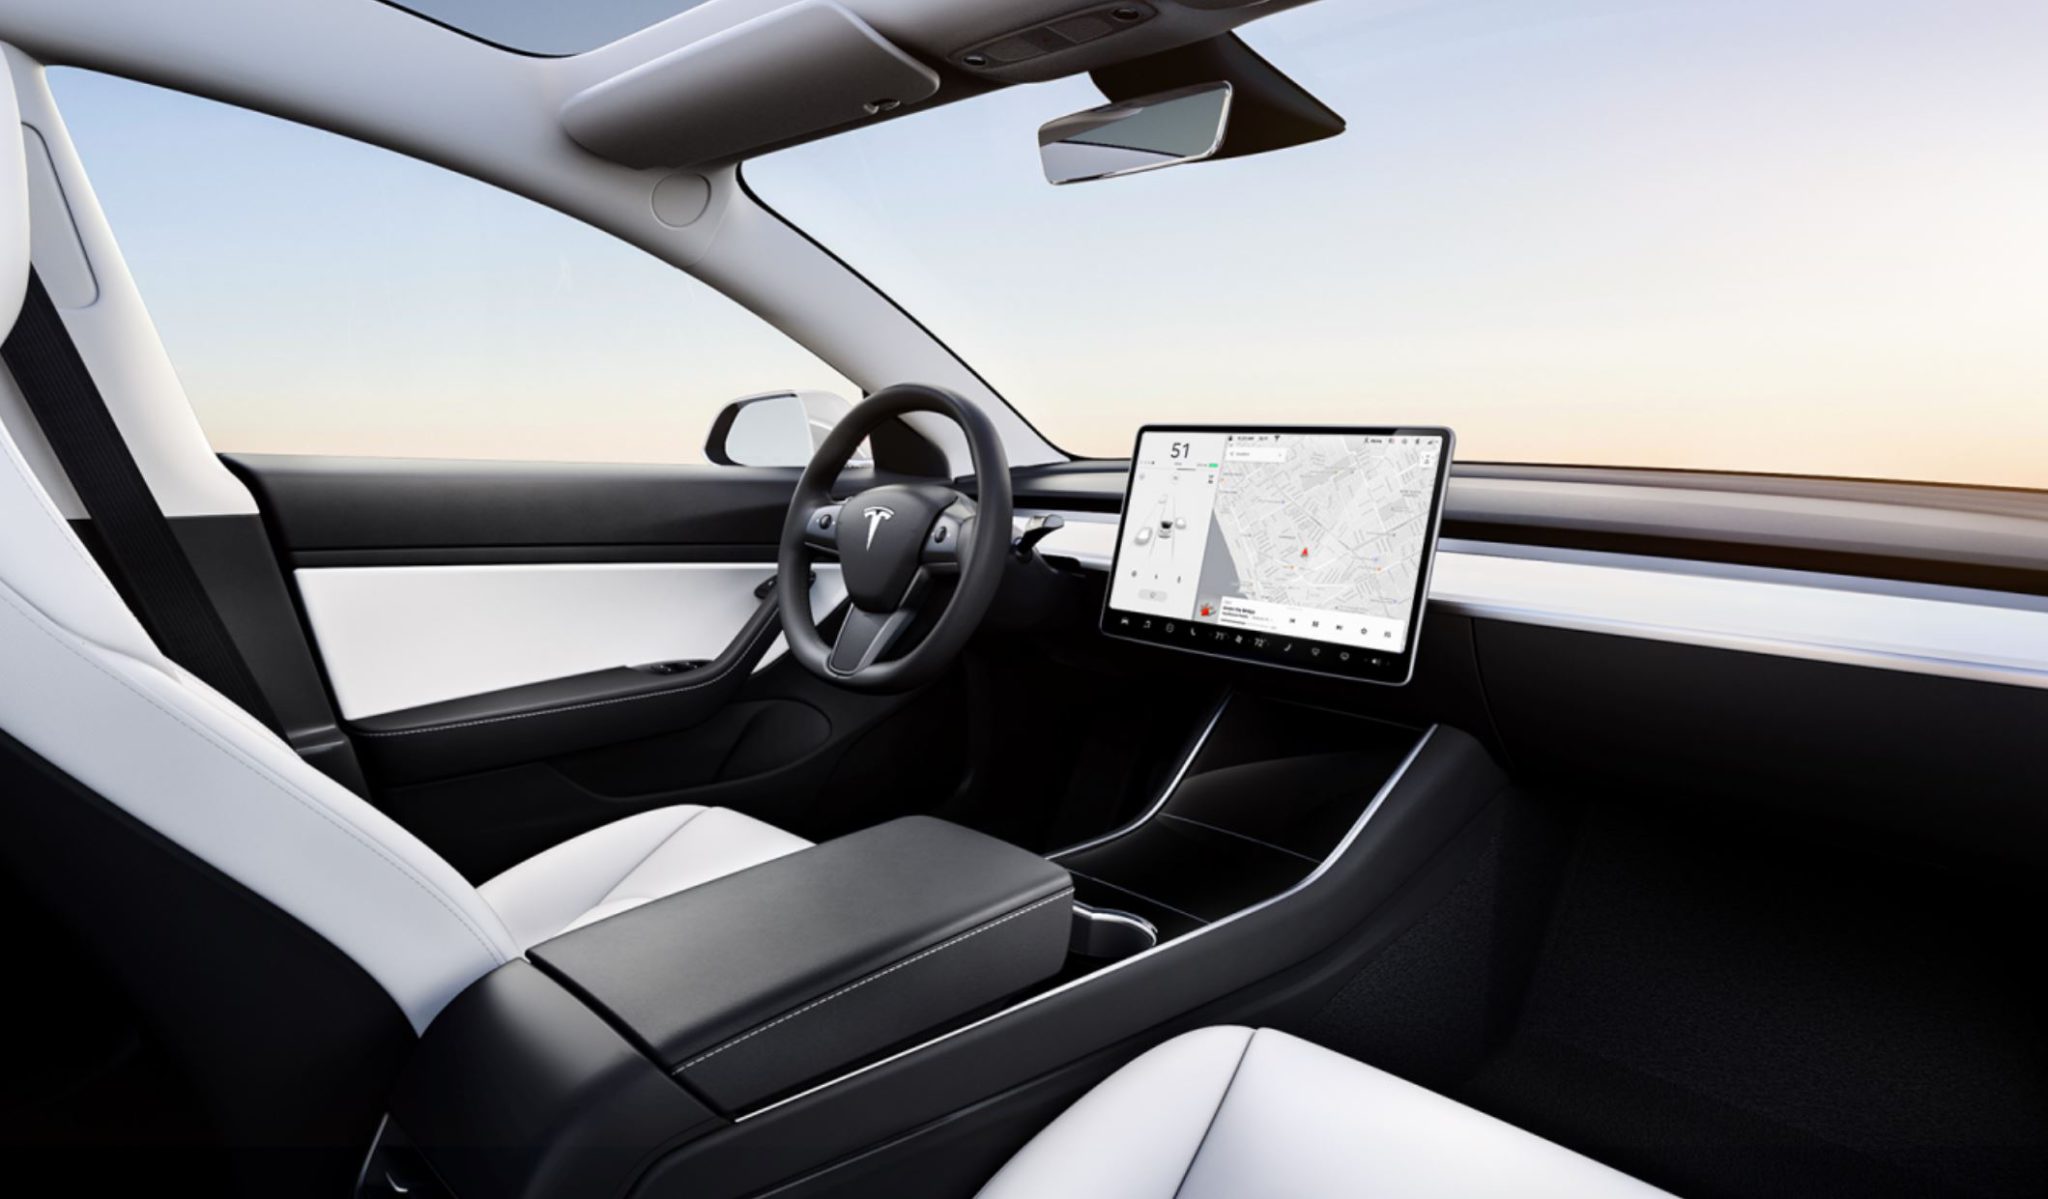 Meal heap Aggregate Pros and cons: Should you purchase the white interior for your new Tesla? -  EV Pulse